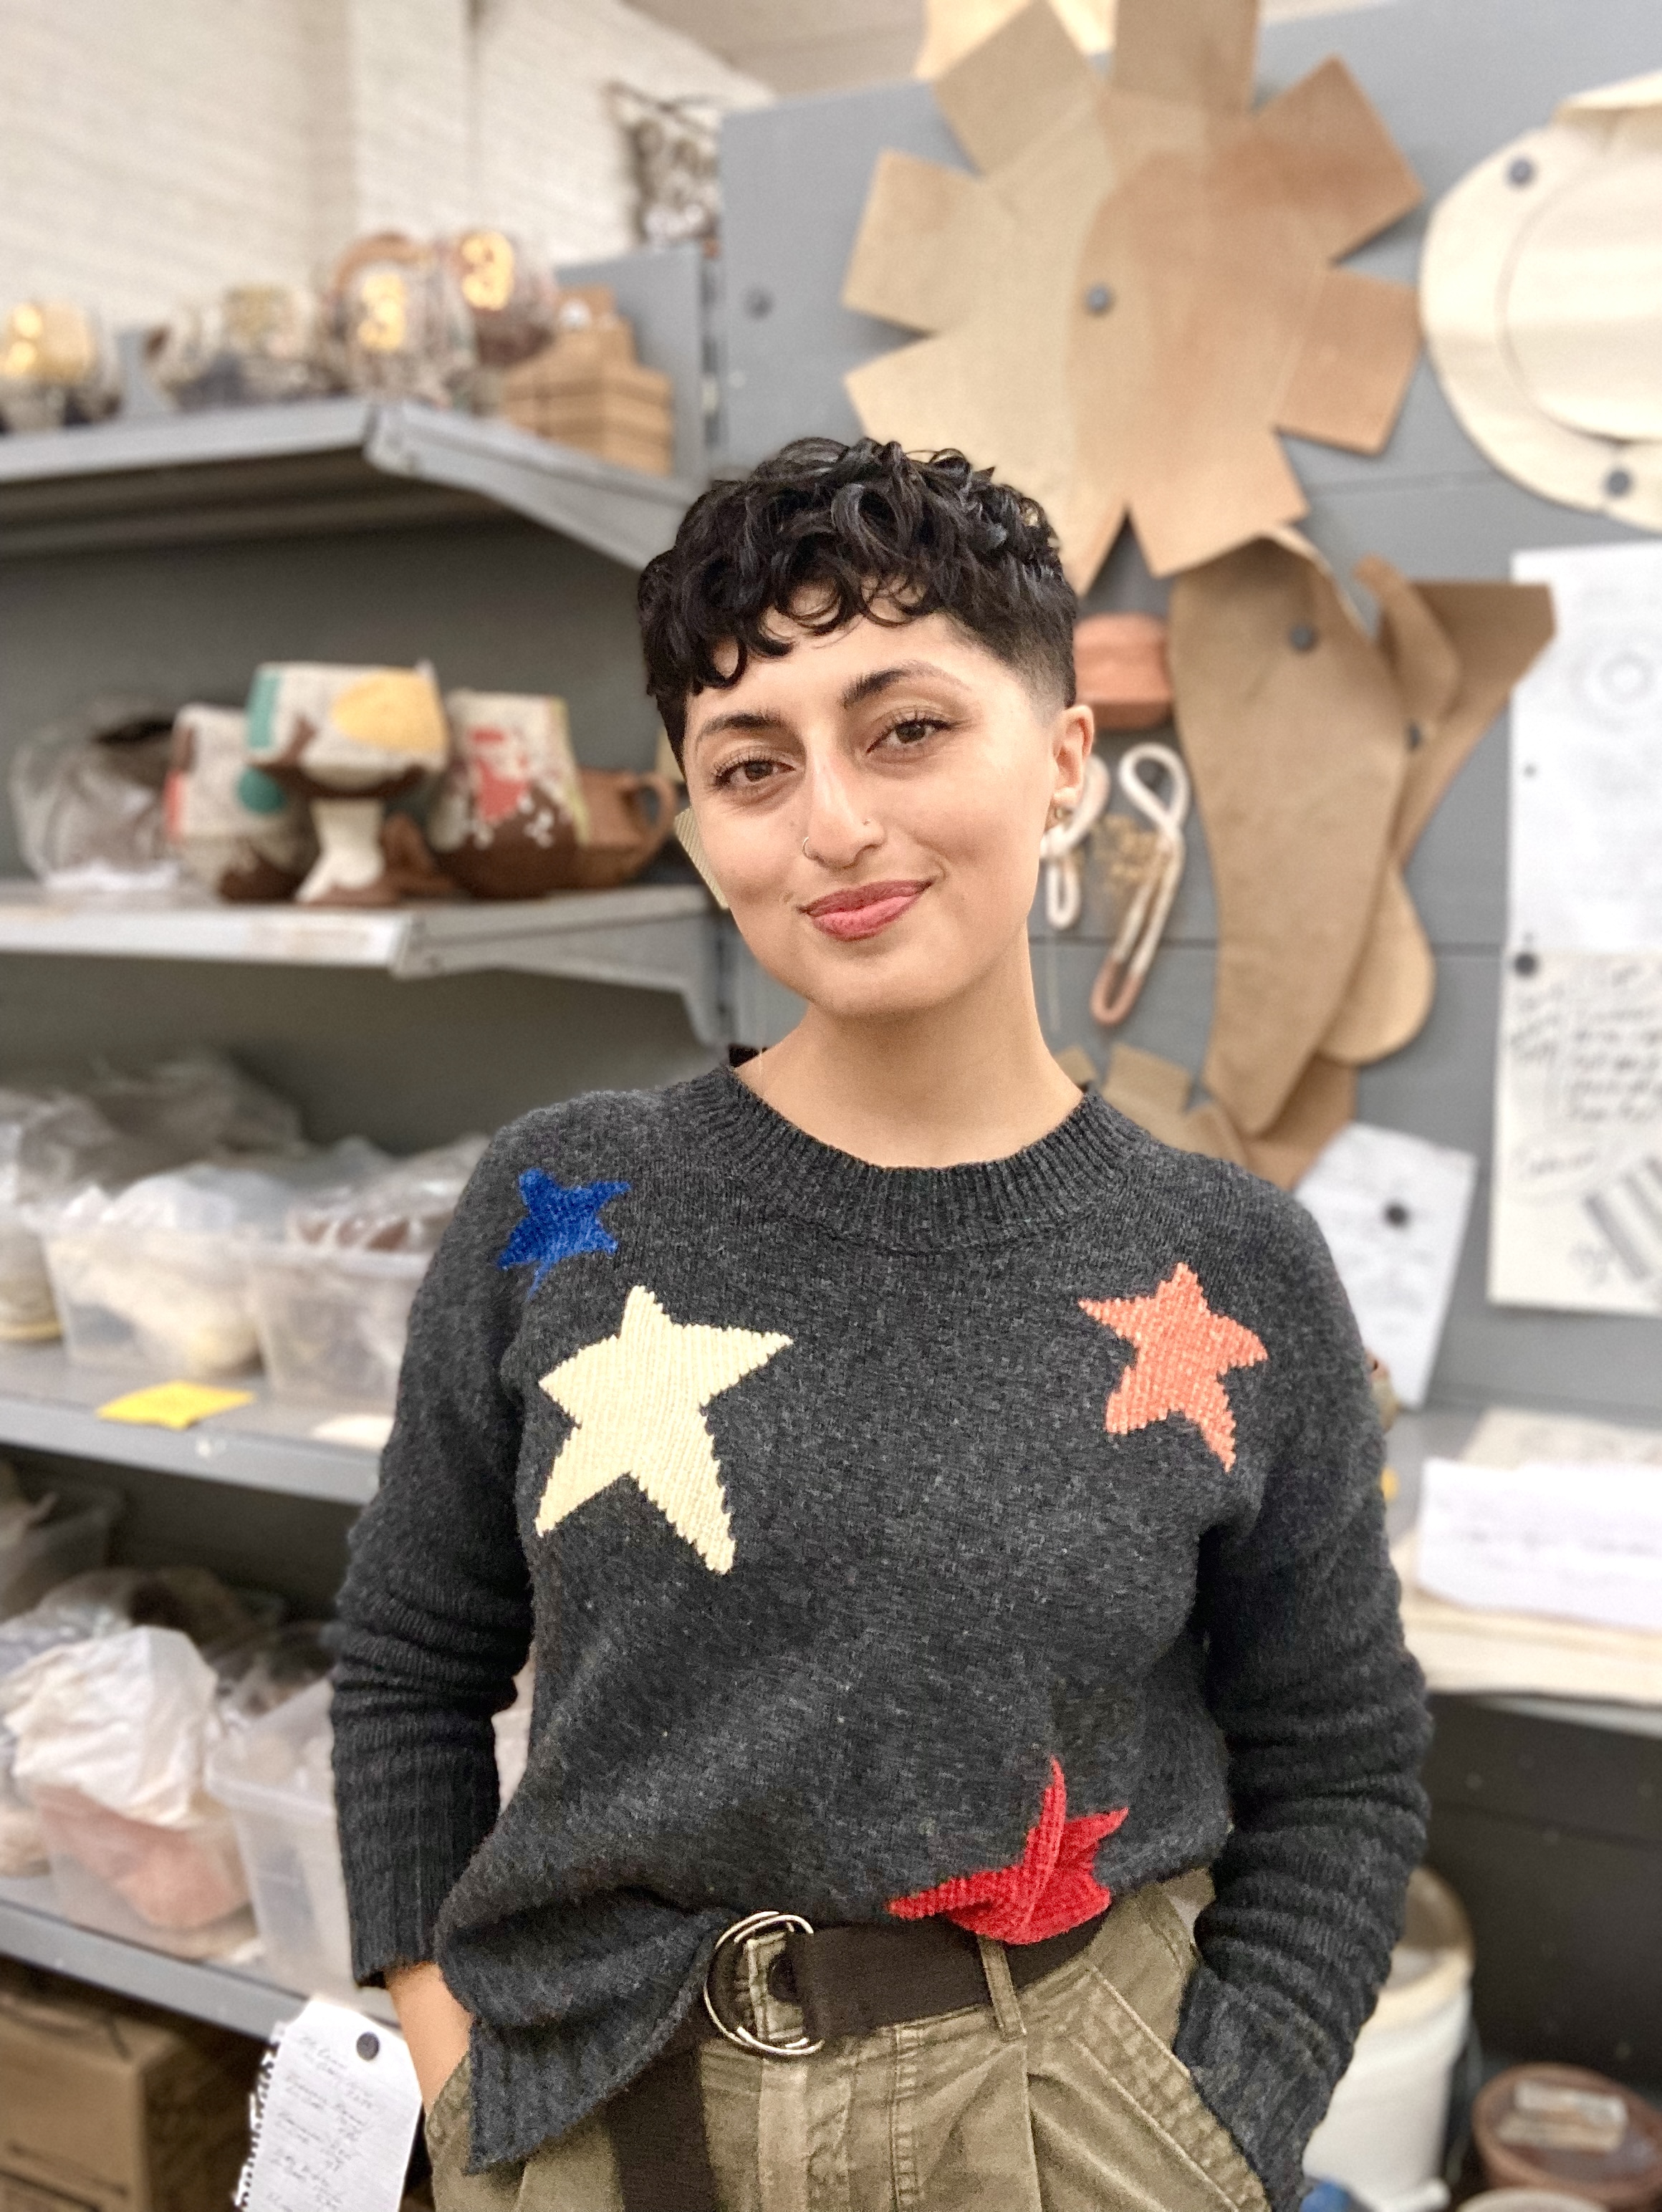 Headshot of Breana Marie Ferreira. The artist is wearing a gray sweater with large stars and is standing in front of a shelf of ceramic materials with her hands in her pockets.